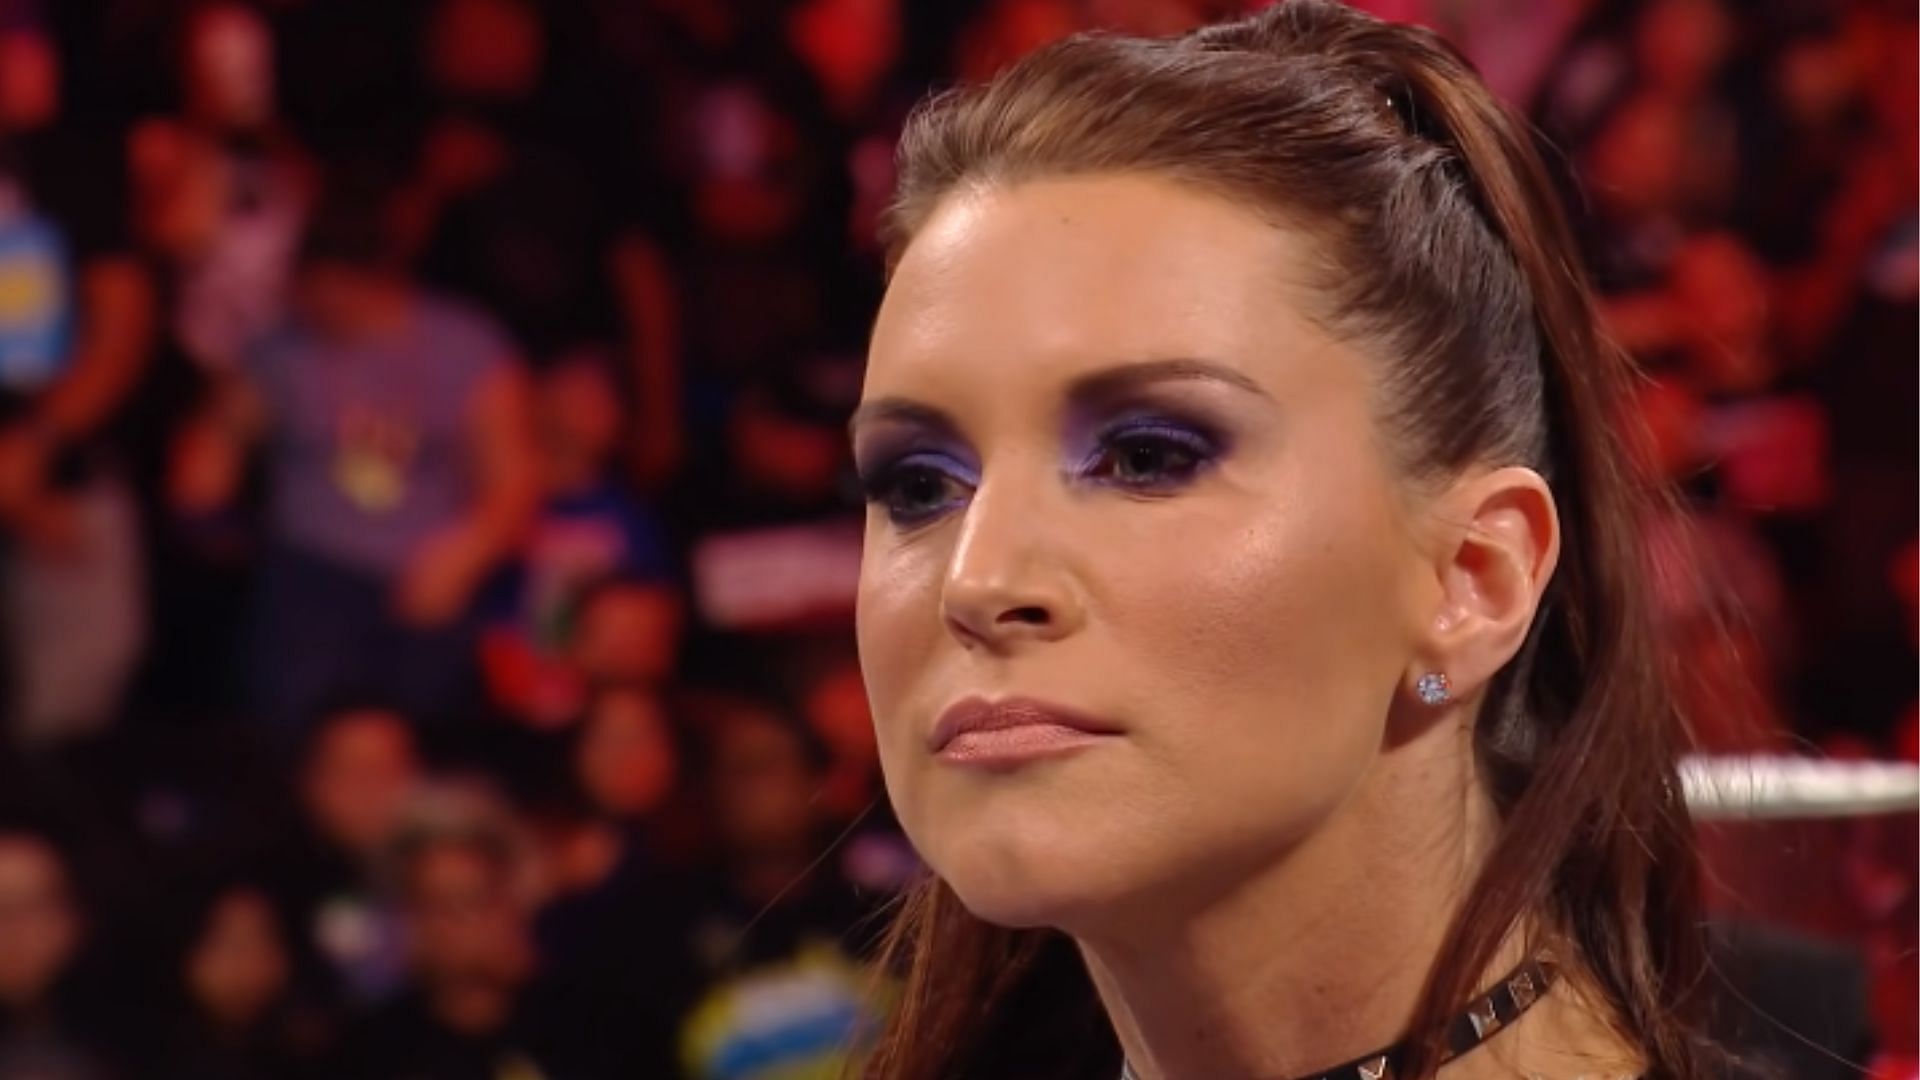 Stephanie McMahon is the current interim CEO of the company